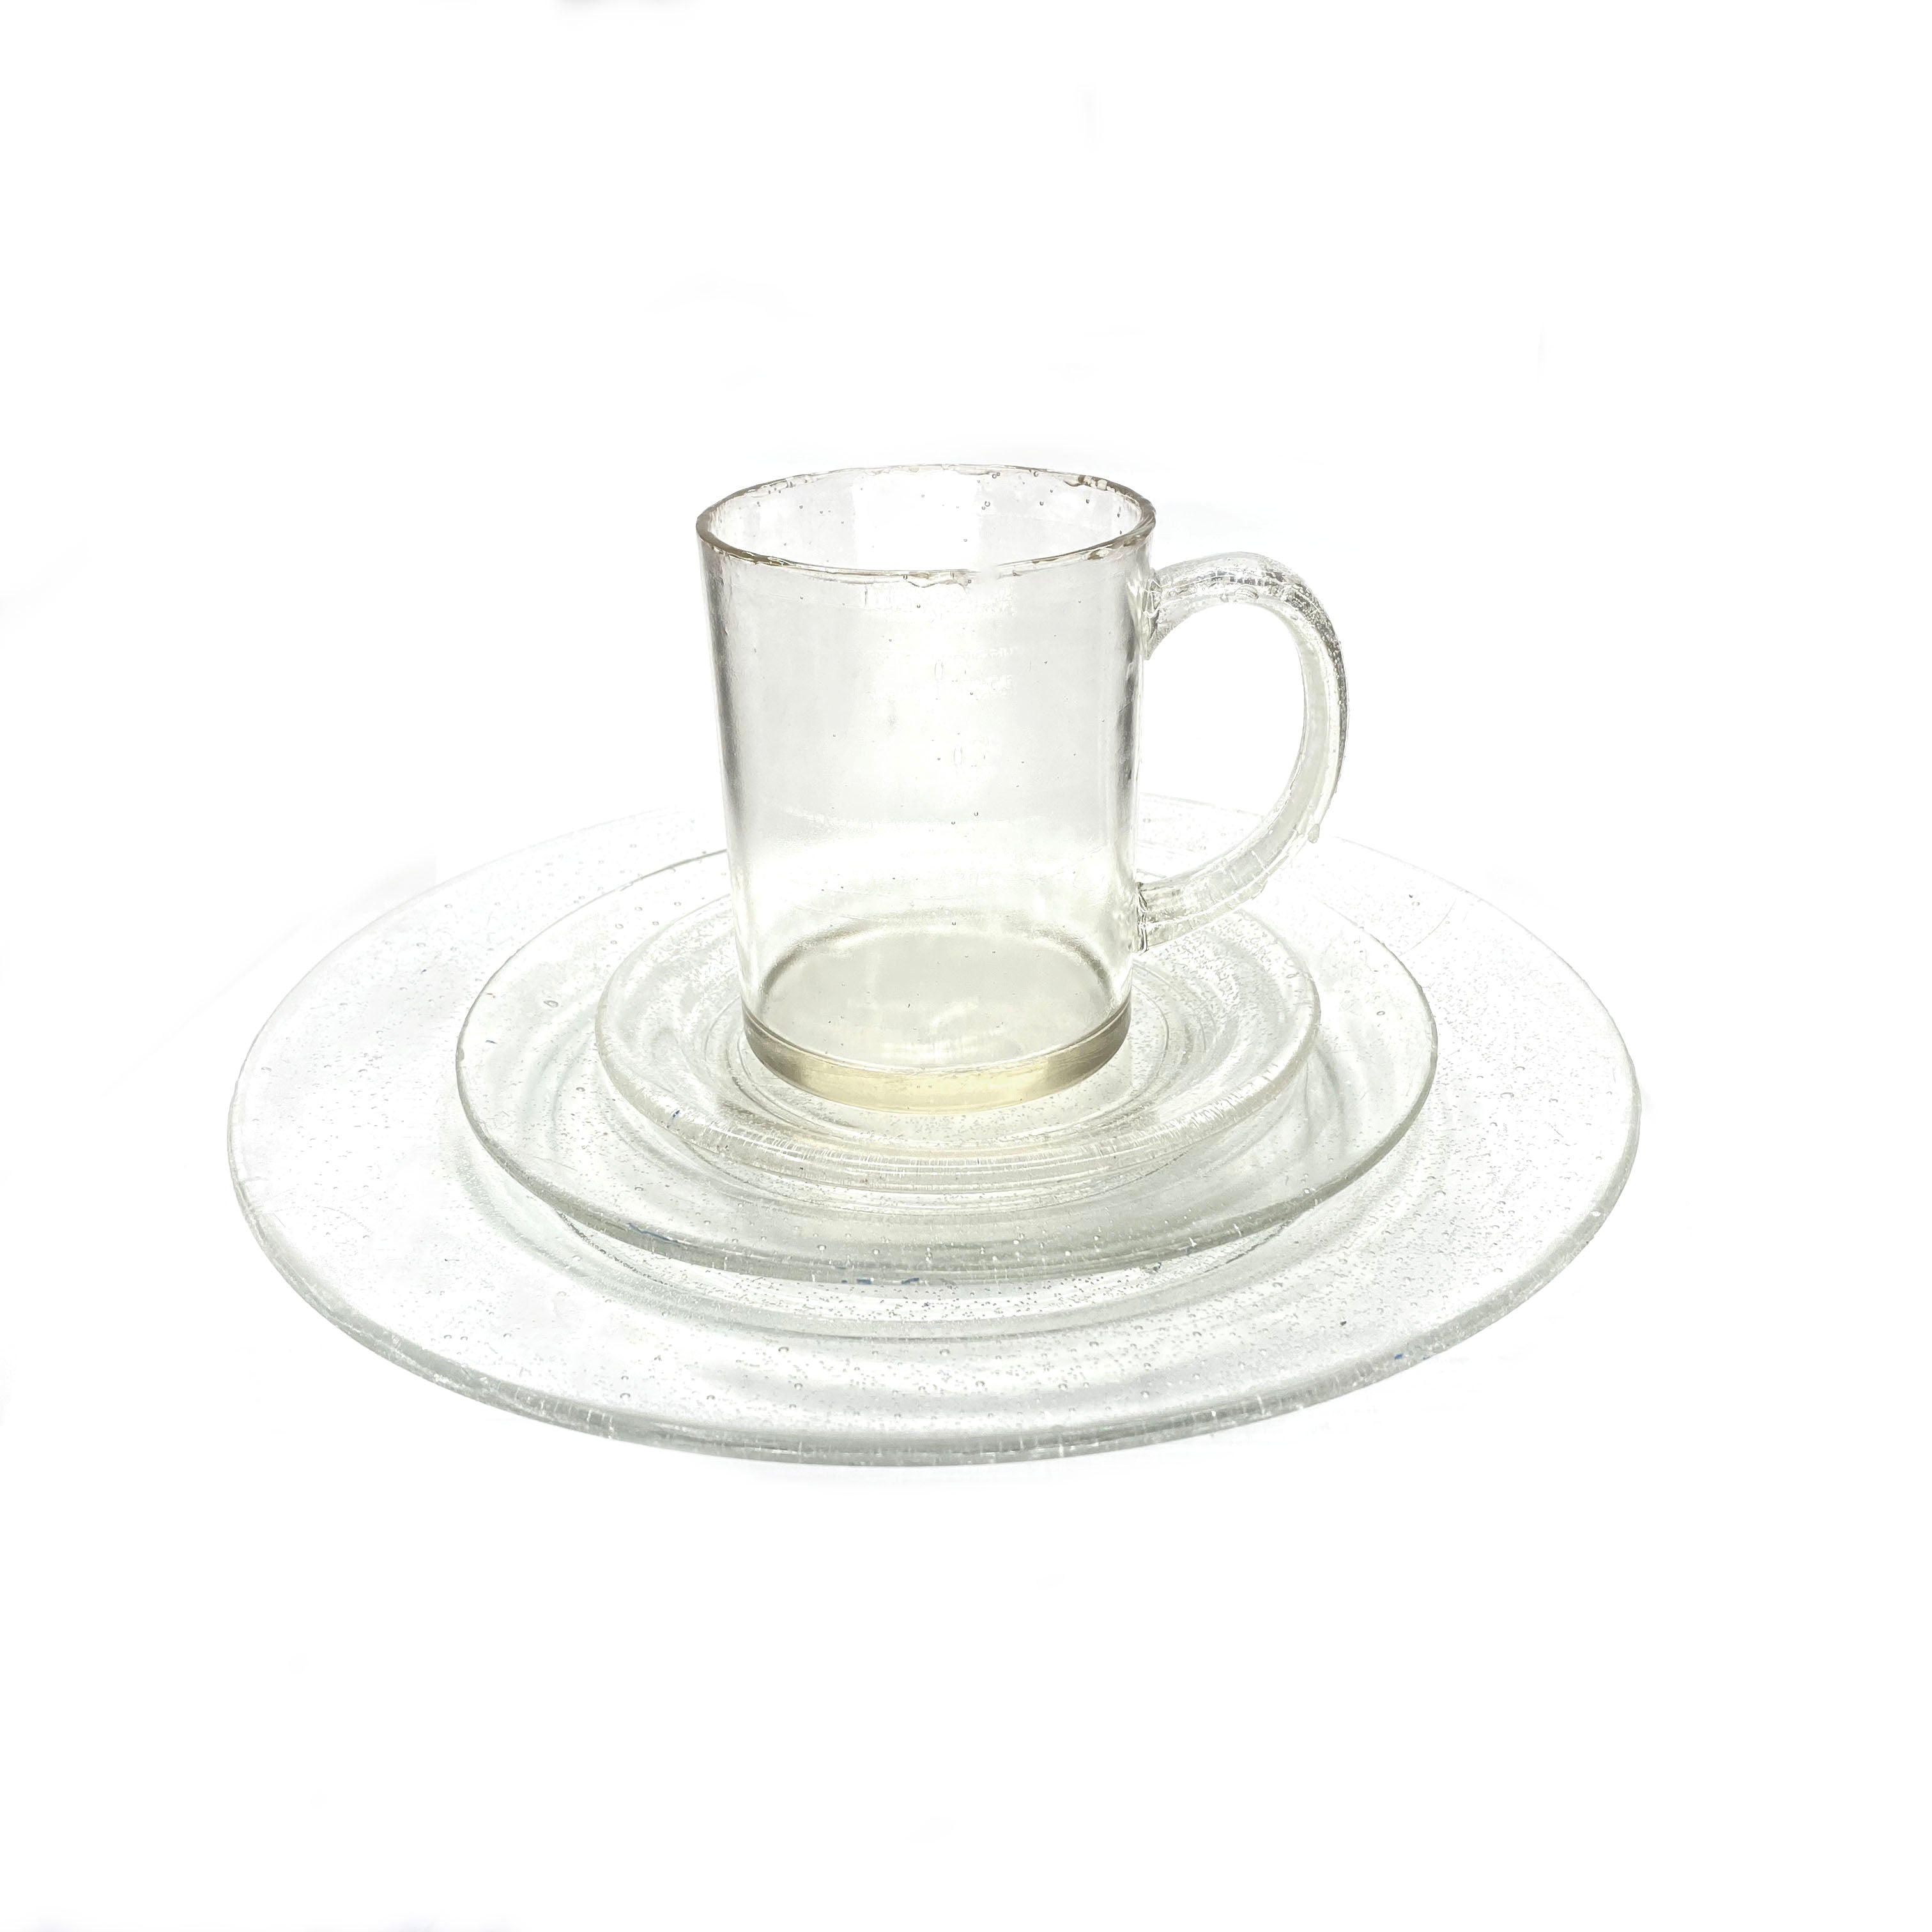 SMASHProps Breakaway 4 Piece Place Setting - CLEAR - Clear,Translucent